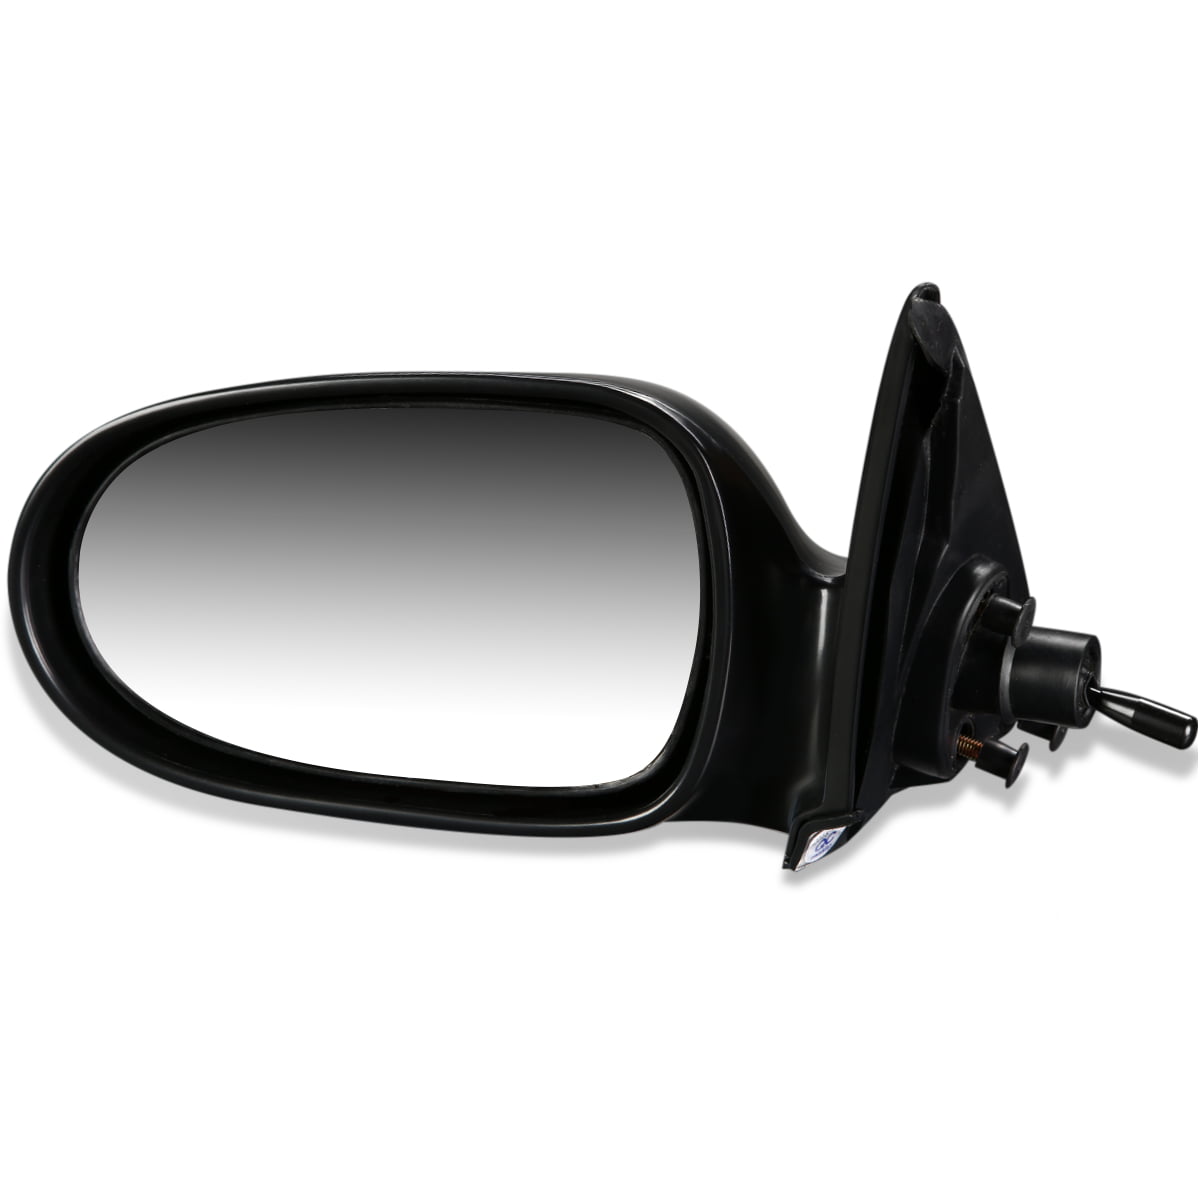 for Nissan Sentra NI1320134 2000 to 2006 New Mirror Driver Side